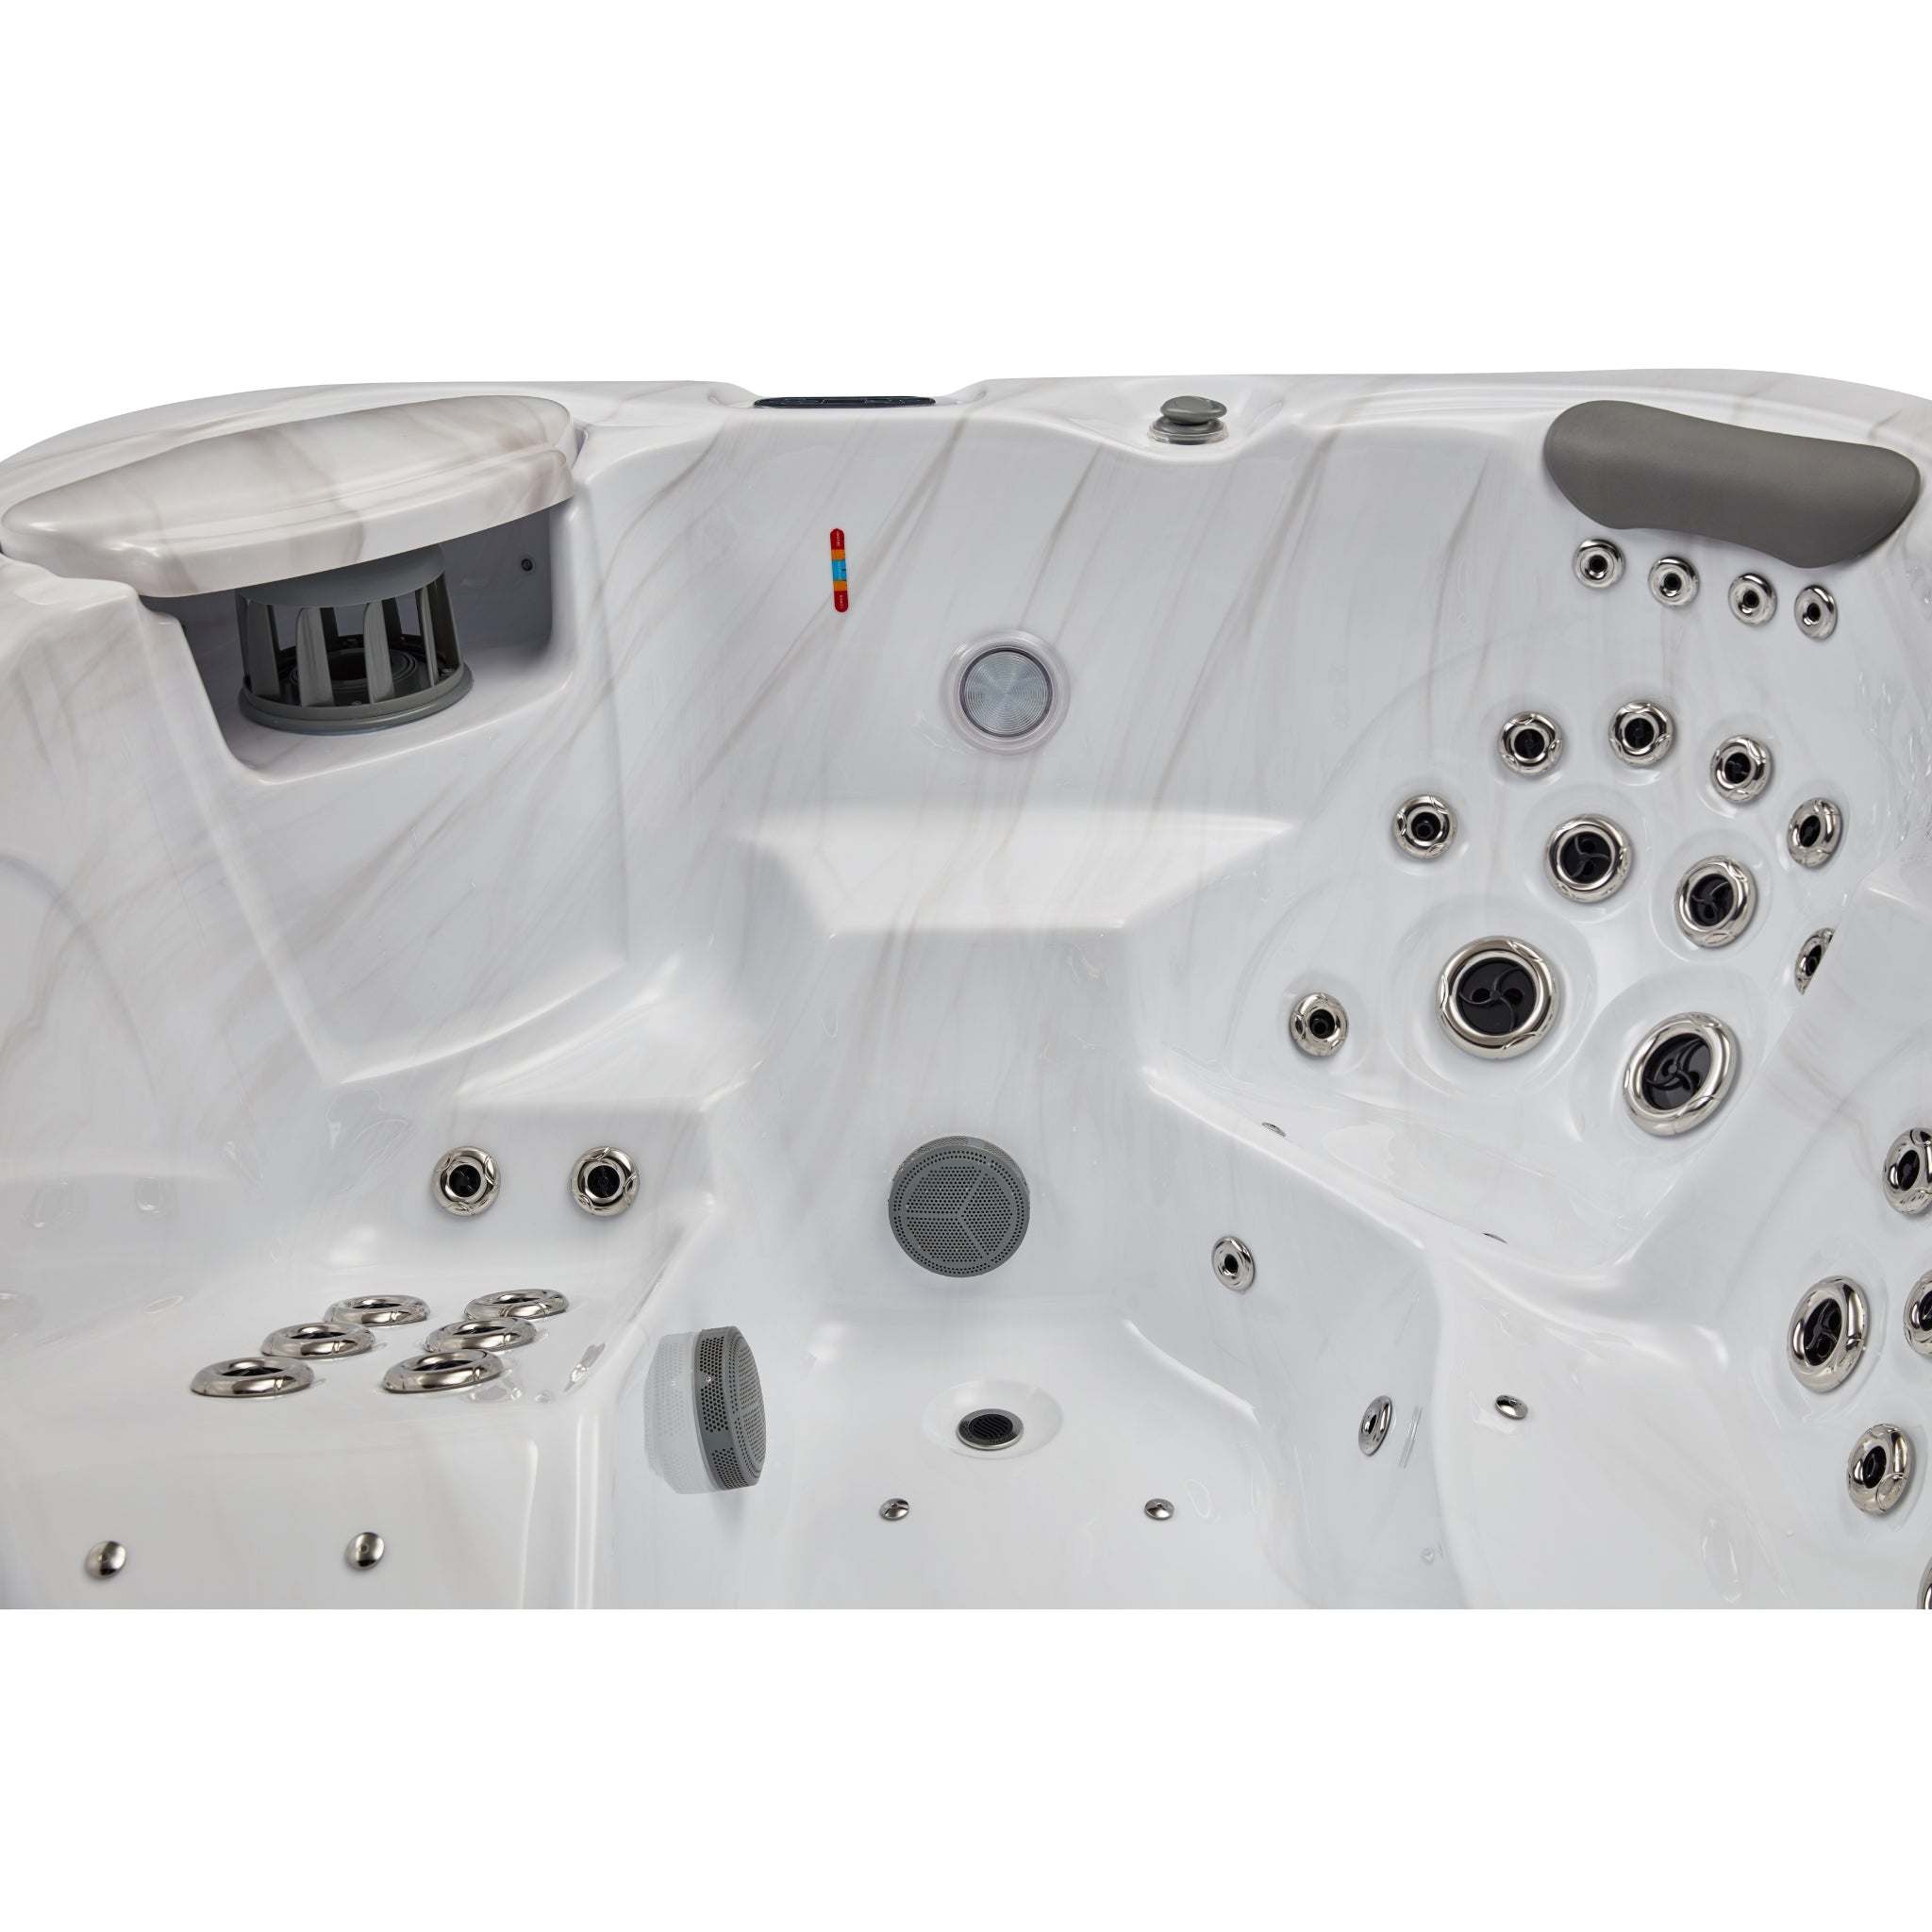 Danika 5-Person 84 Jet Lounger Hot Tub with Bluetooth